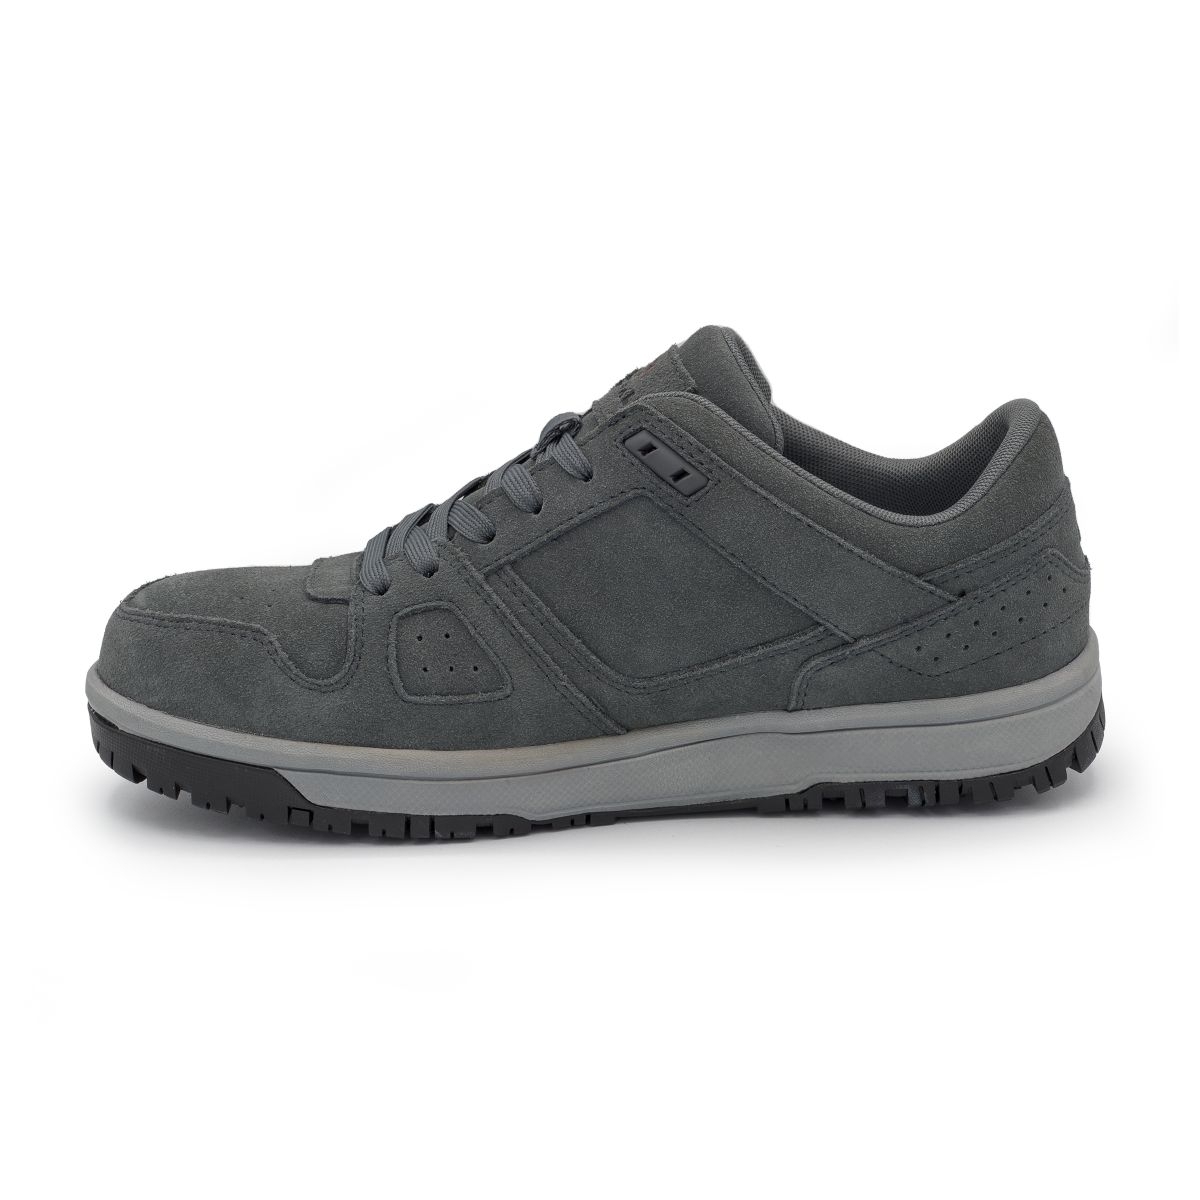 AIRWALK SAFETY Men's Mongo Composite Toe EH Work Shoe Charcoal/Grey - AW6301 CHARCOAL/GRAY - CHARCOAL/GRAY, 12-M